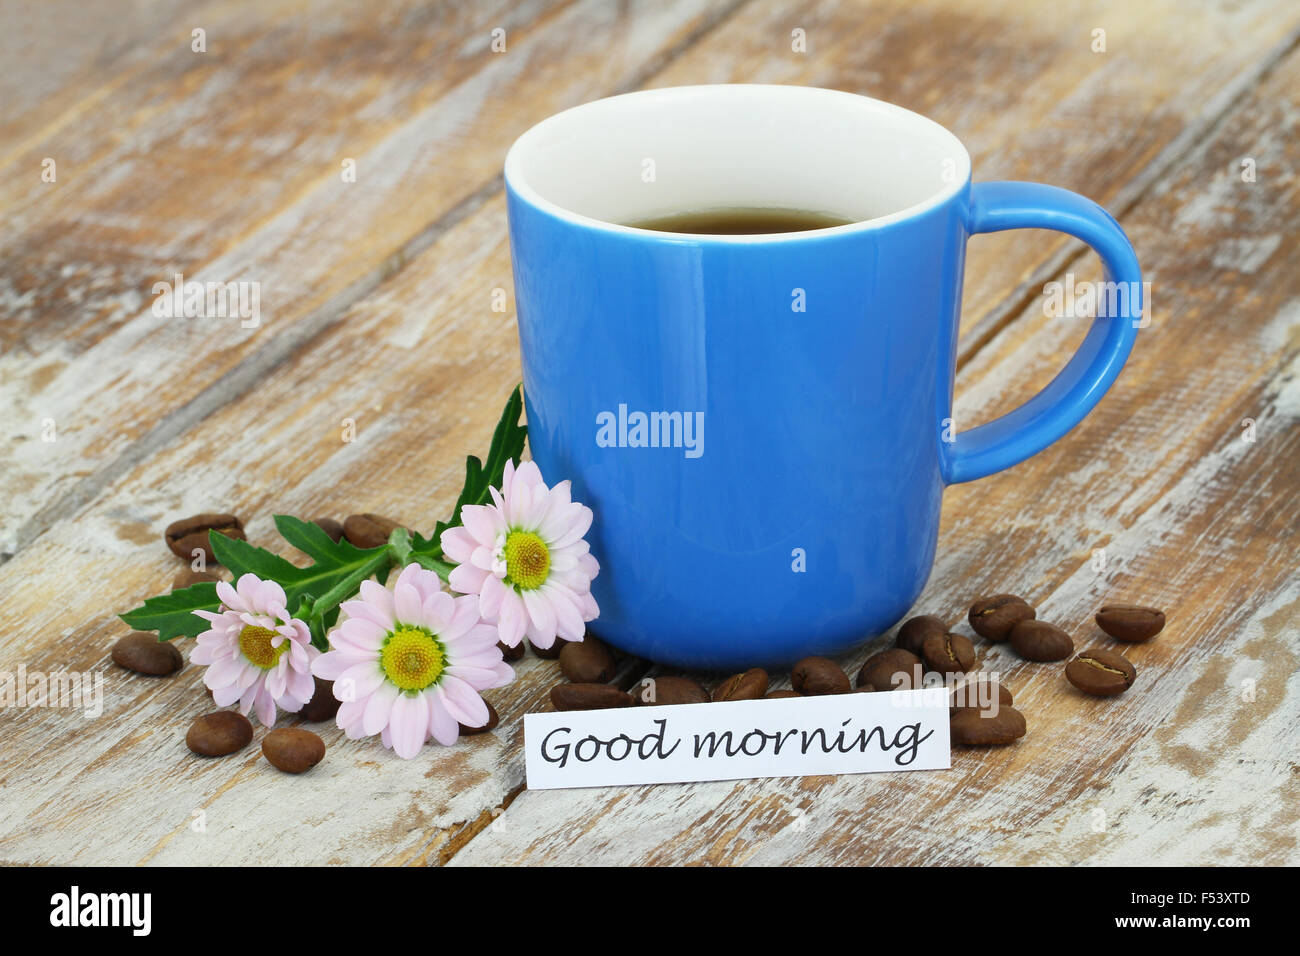 Good morning card with mug of coffee, pink daisies with copy space Stock Photo